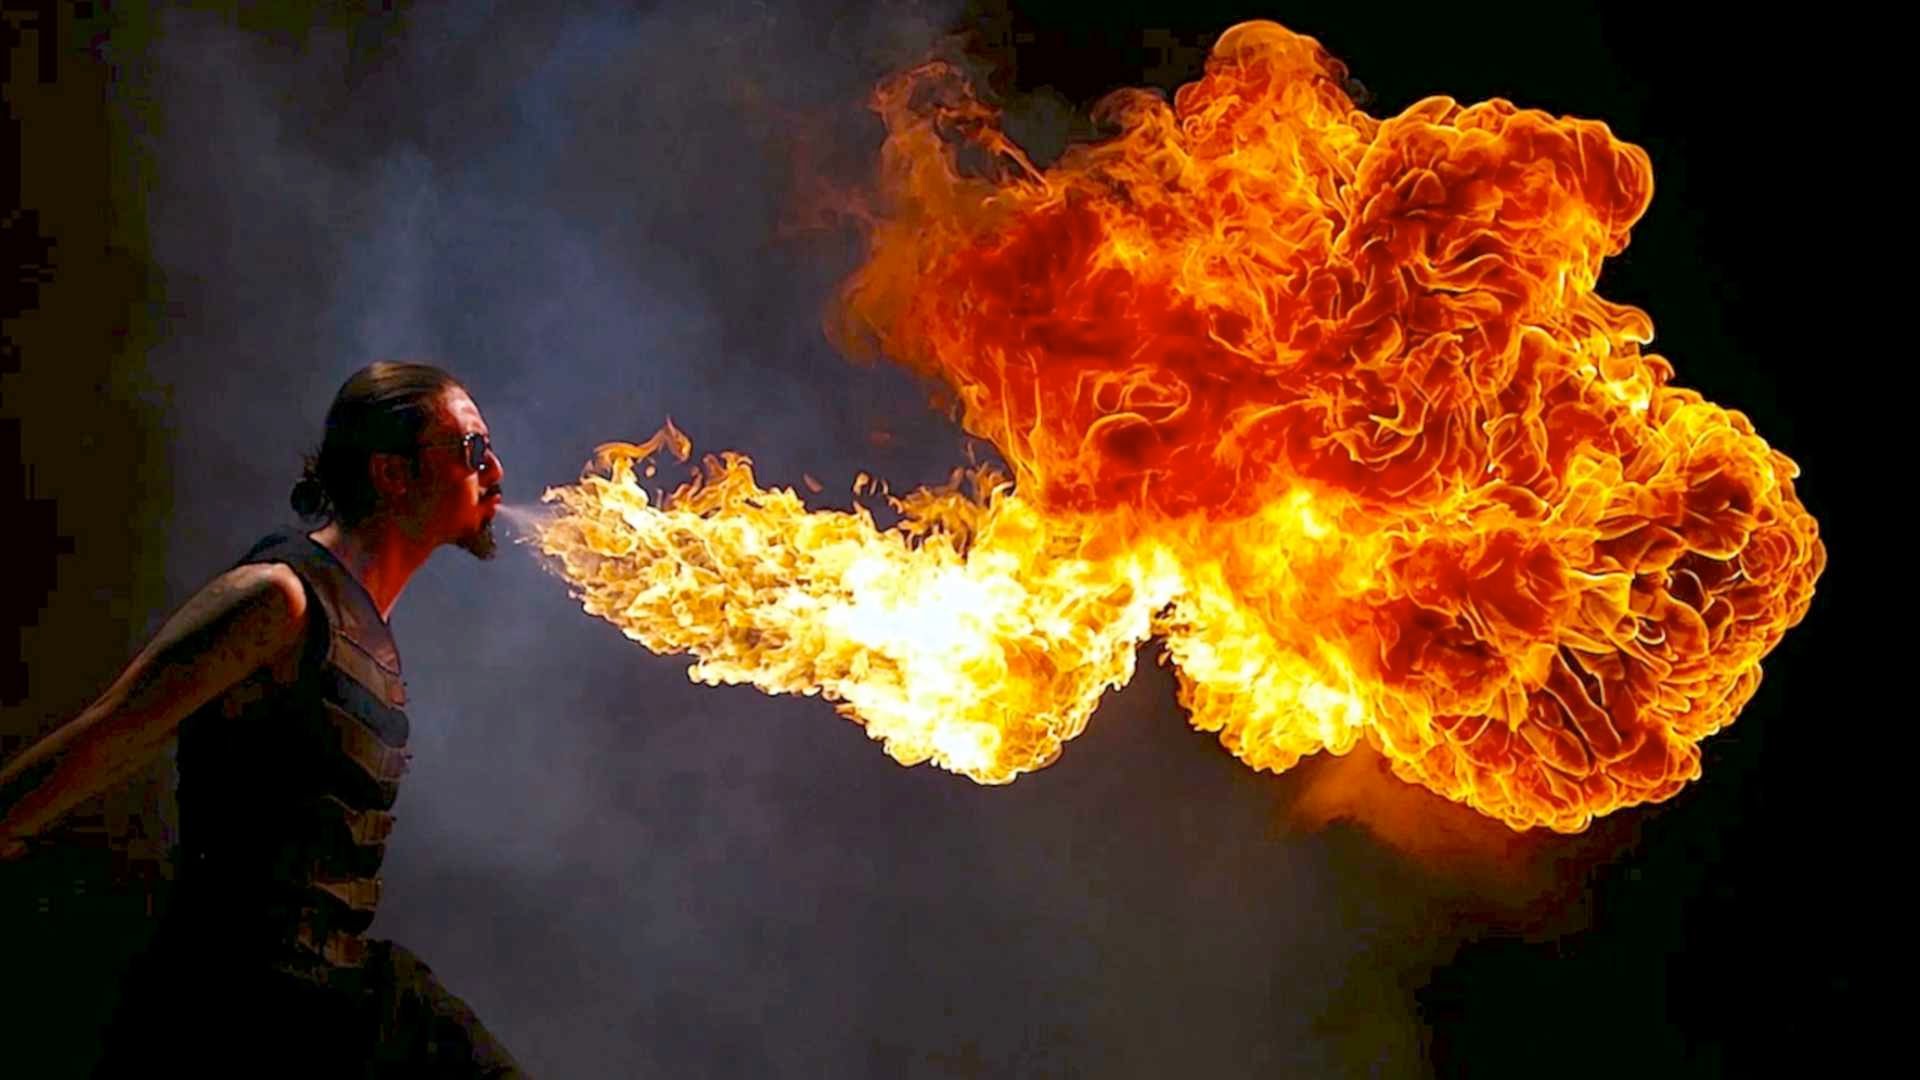 A person firebreathing